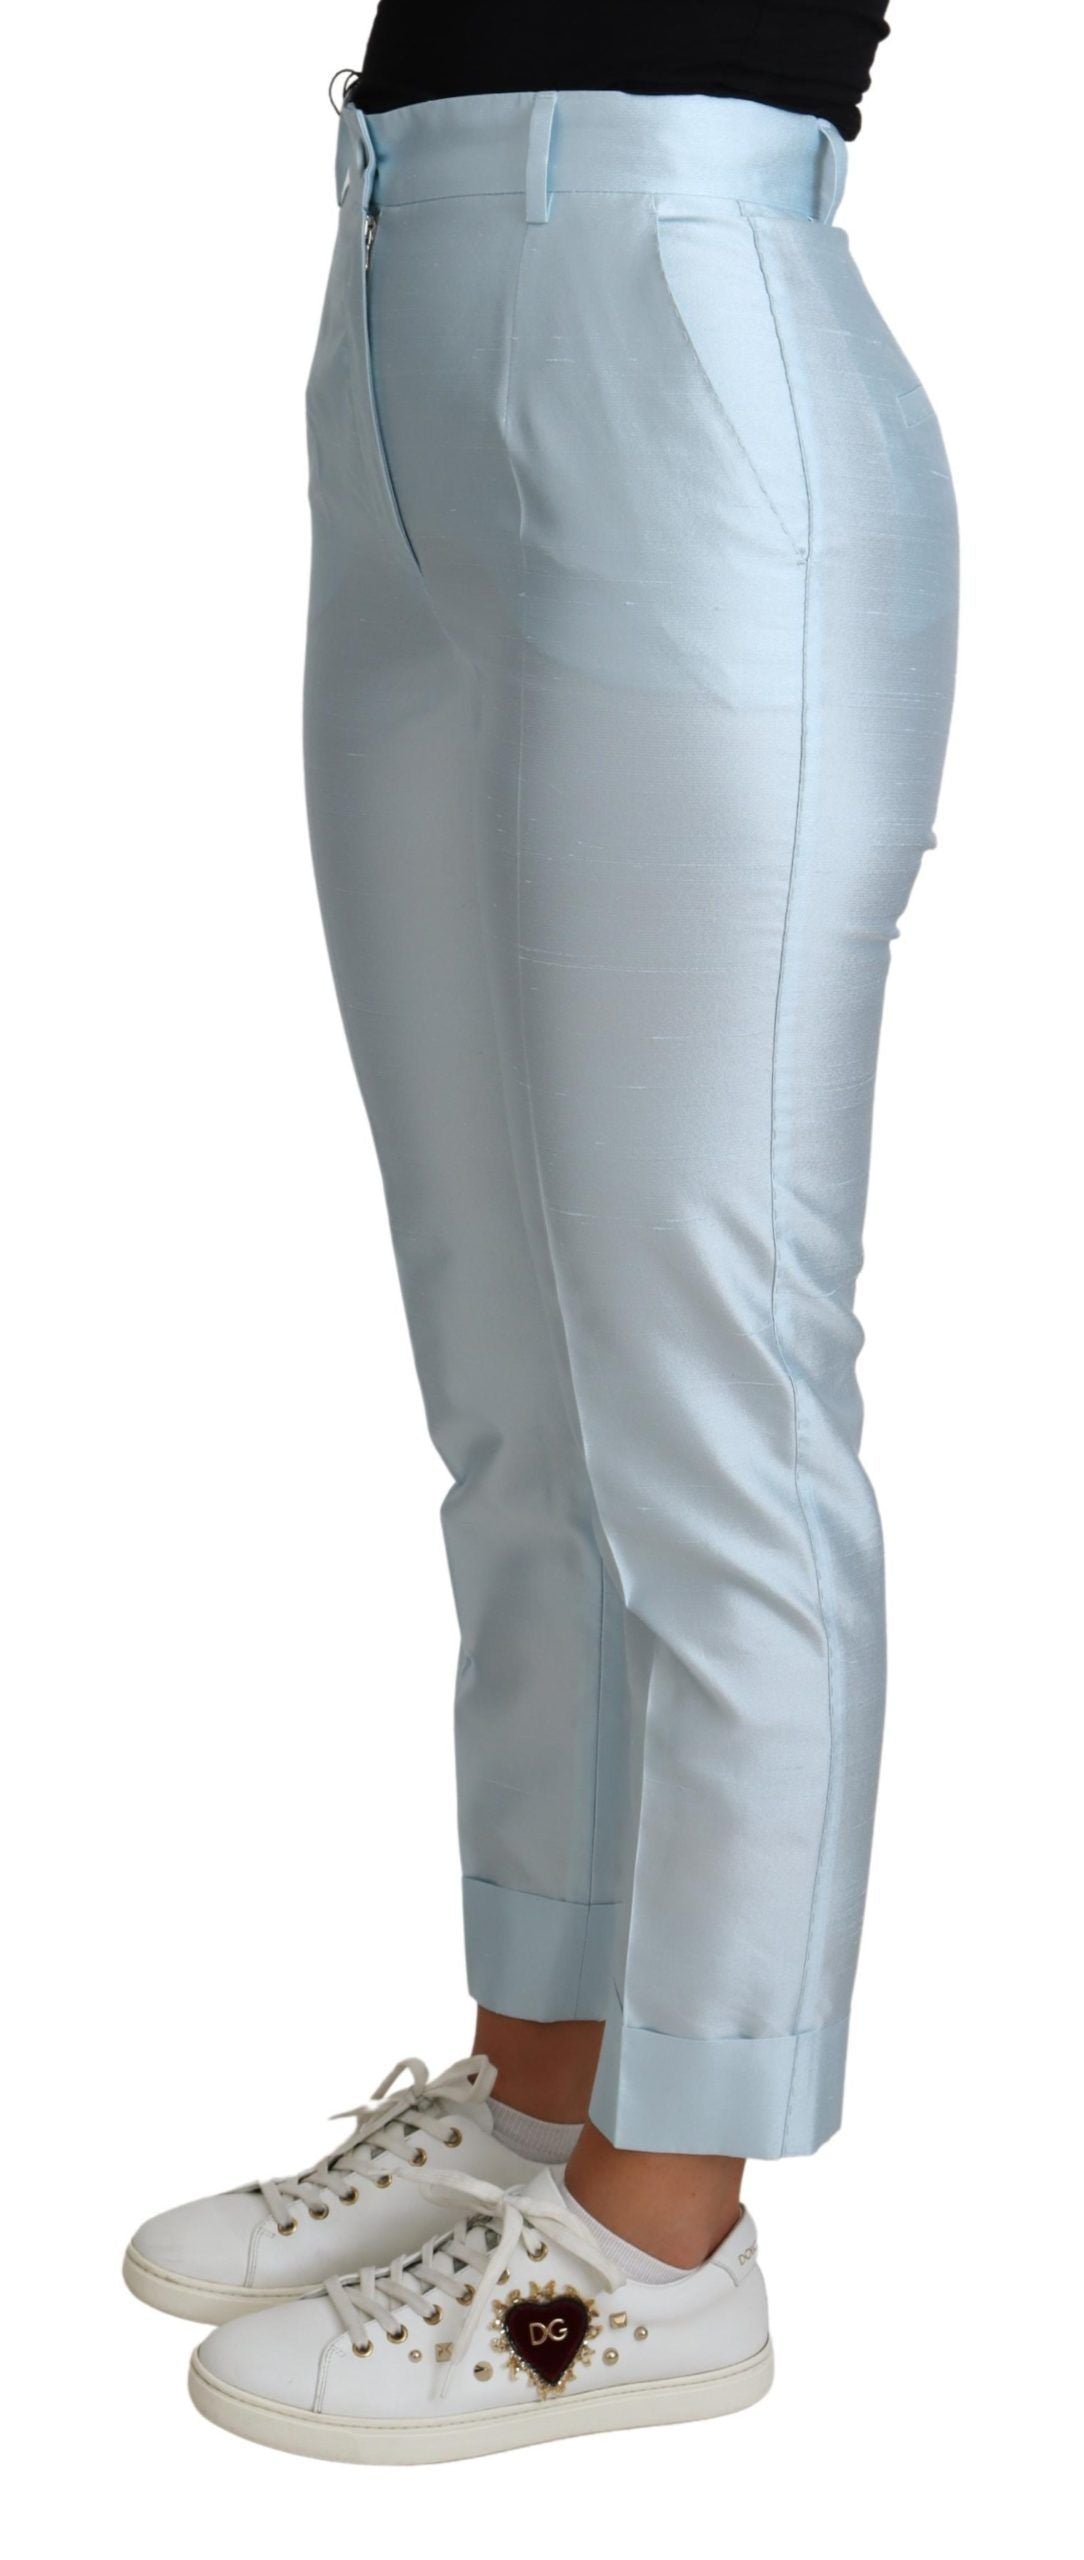 Dolce & Gabbana Light Blue Silk Cropped Tapered Trouser Pants